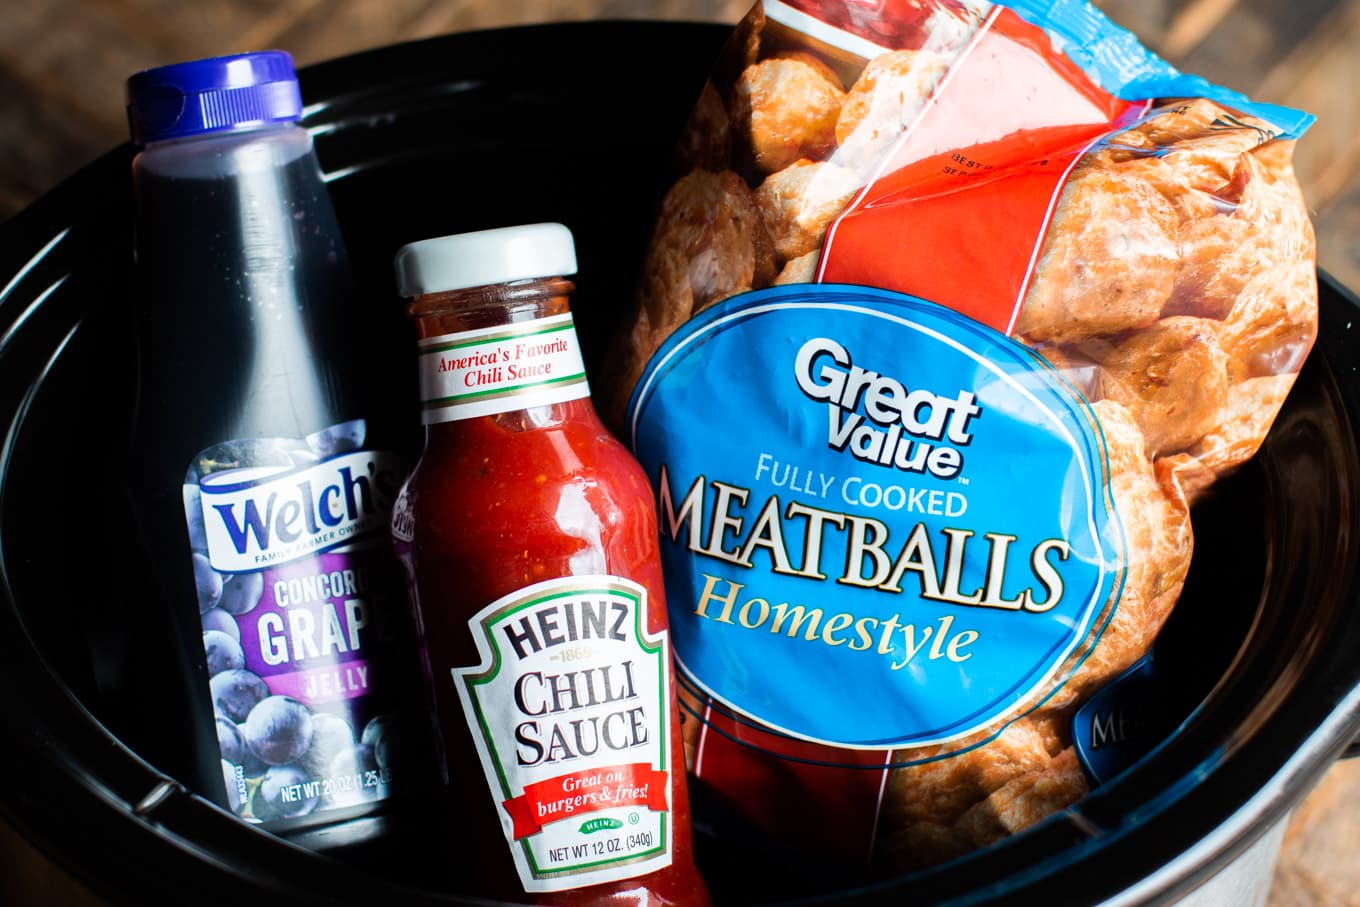 ingredients for grape jelly meatballs; grape jelly chili sauce, frozen meatballs